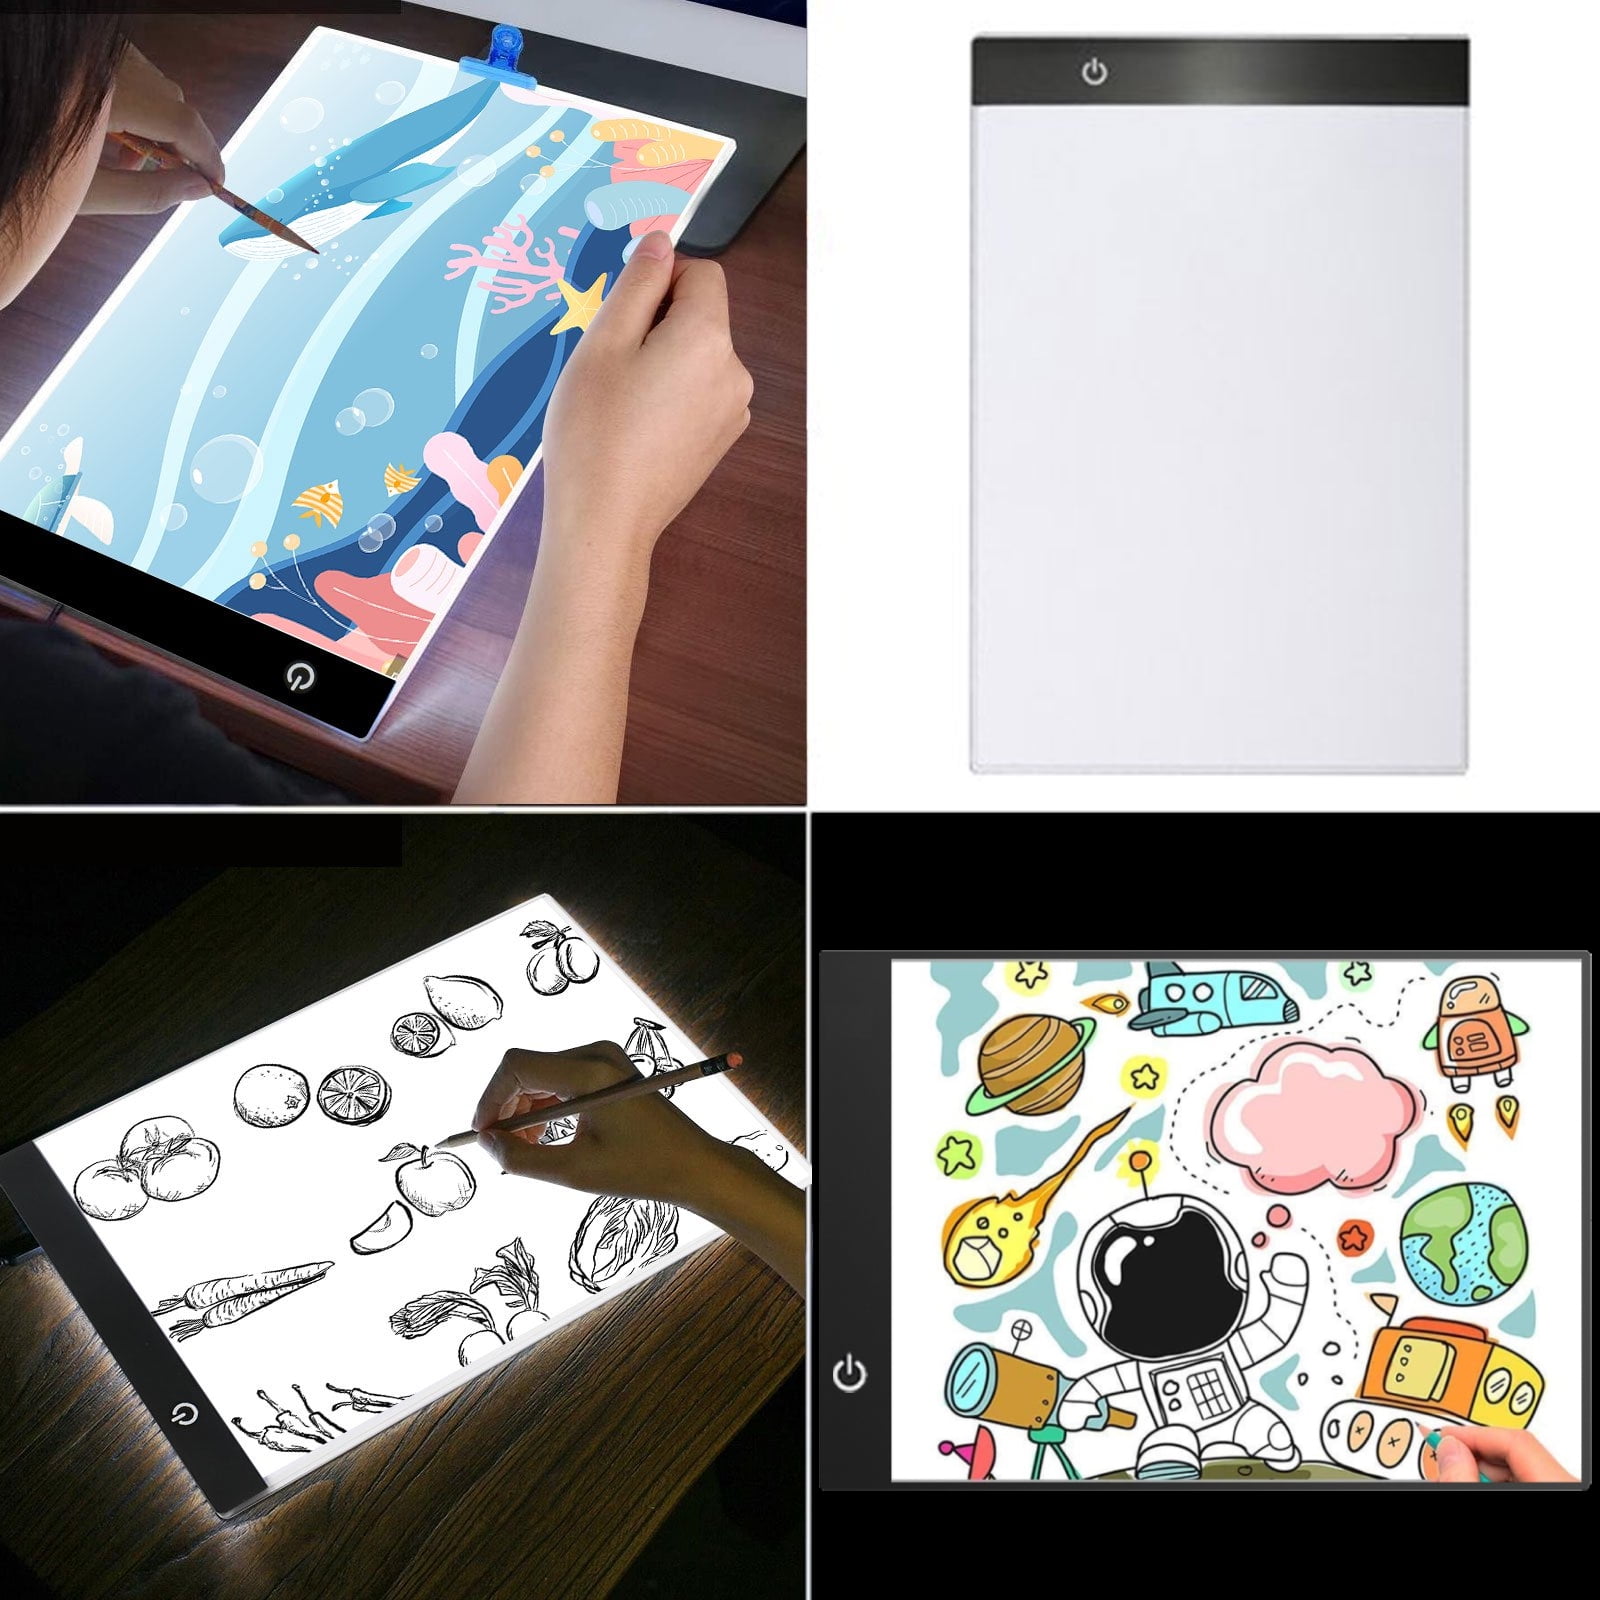 NXENTC LED Light Box for Tracing Ultra Thin Light Pad with Adjustable Brightness Portable Light Board for Sketching,Tattoo Drawing Animation and Stencilling Red Artists Painting 